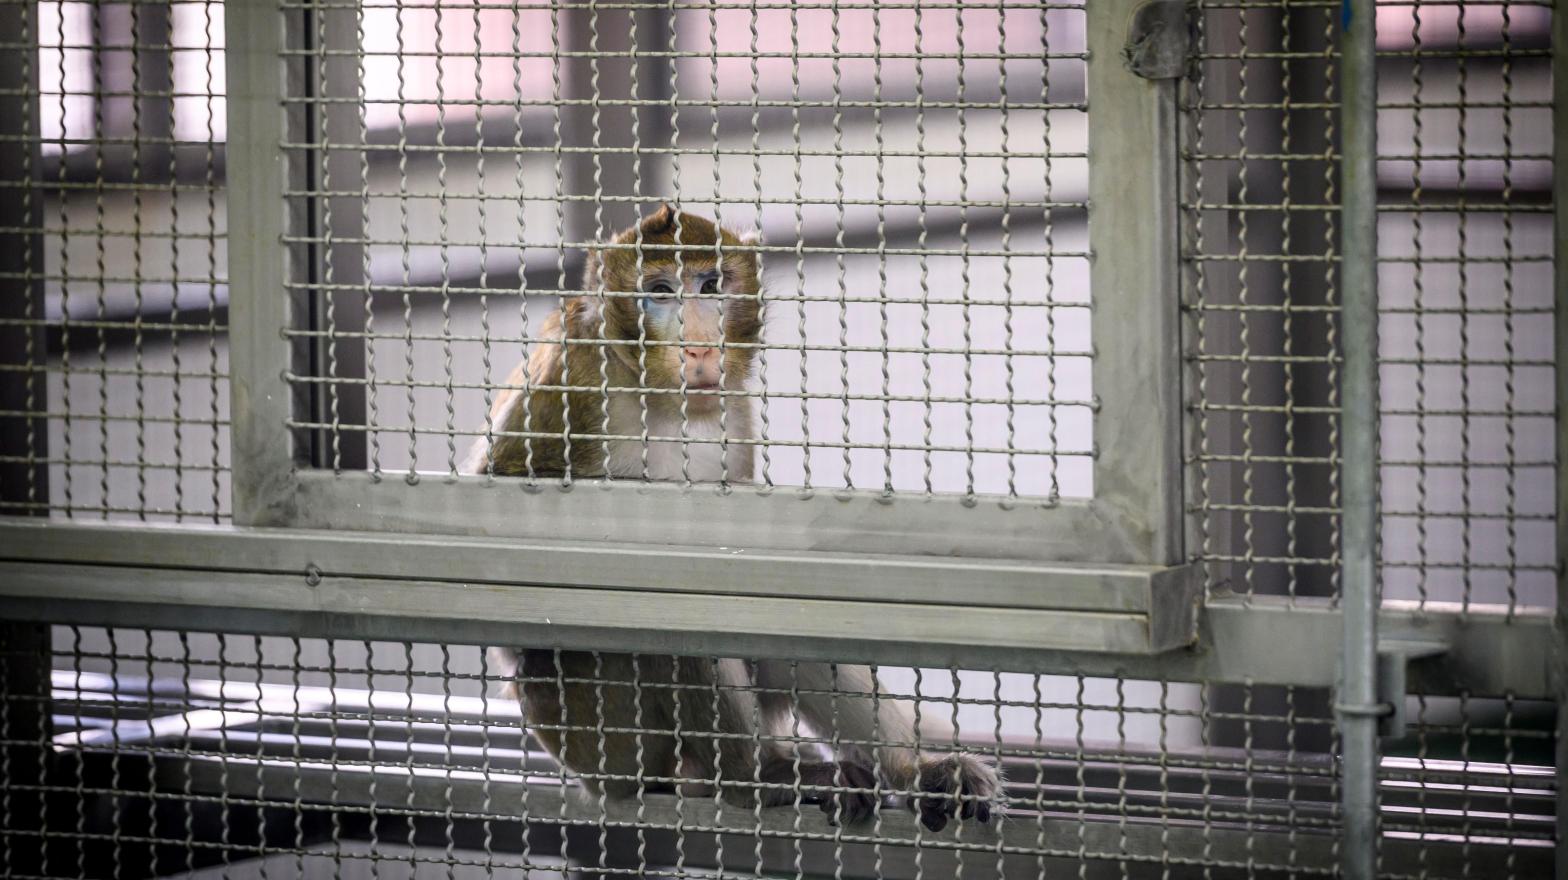 This picture taken on May 23, 2020 shows a laboratory monkey sitting in its cage in the breeding centre for cynomolgus macaques (longtail macaques) at the National Primate Research Centre of Thailand at Chulalongkorn University in Saraburi. (Photo: Mladen Antonov, Getty Images)